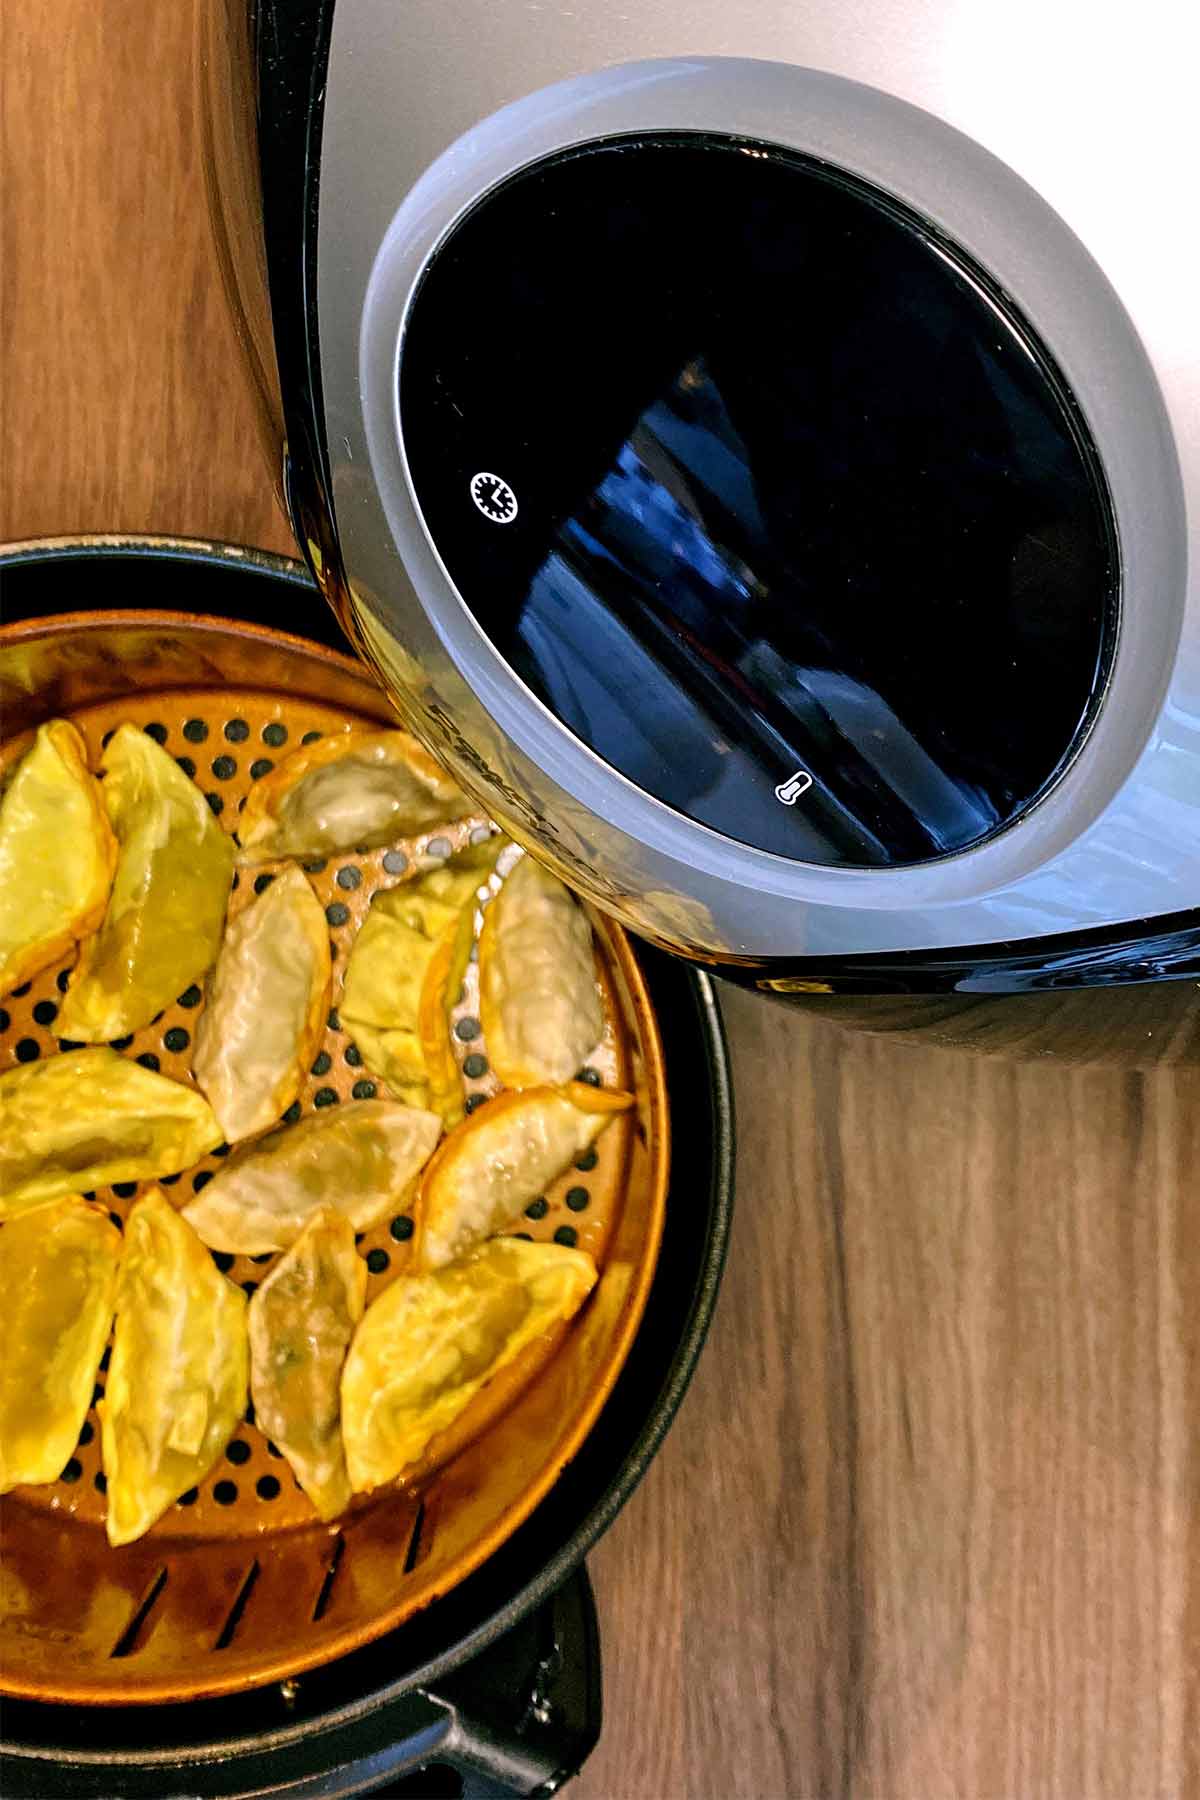 Cooked gyoza in an air fryer basket.